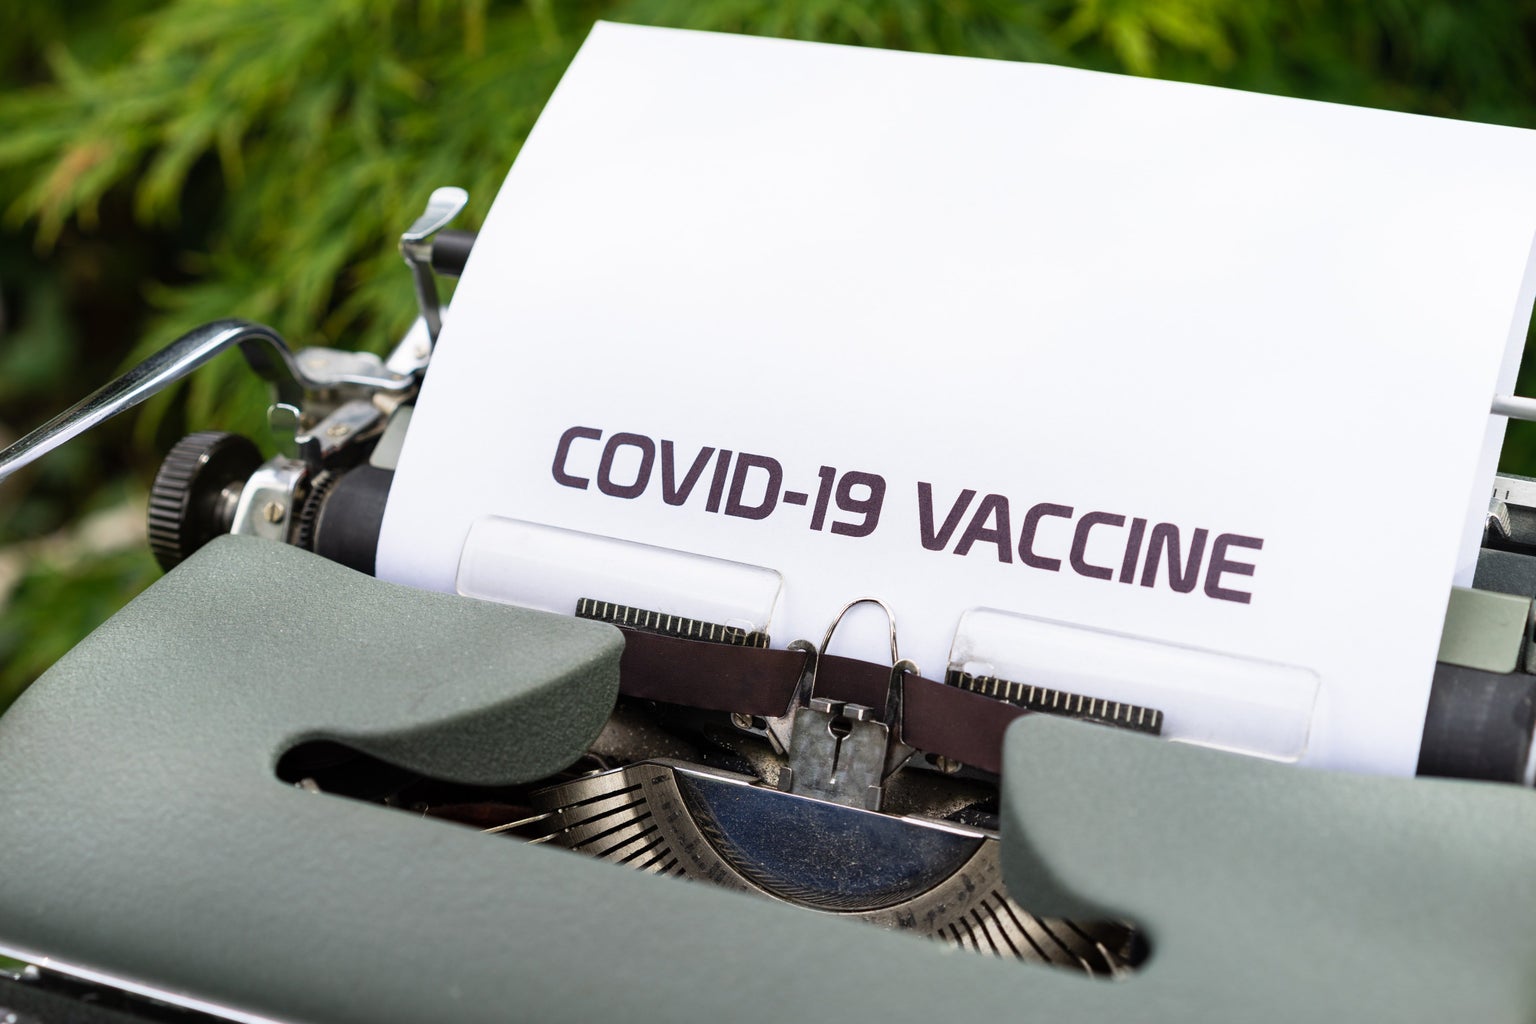 \"COVID-19 VACCINE\" typed on paper in a typewriter